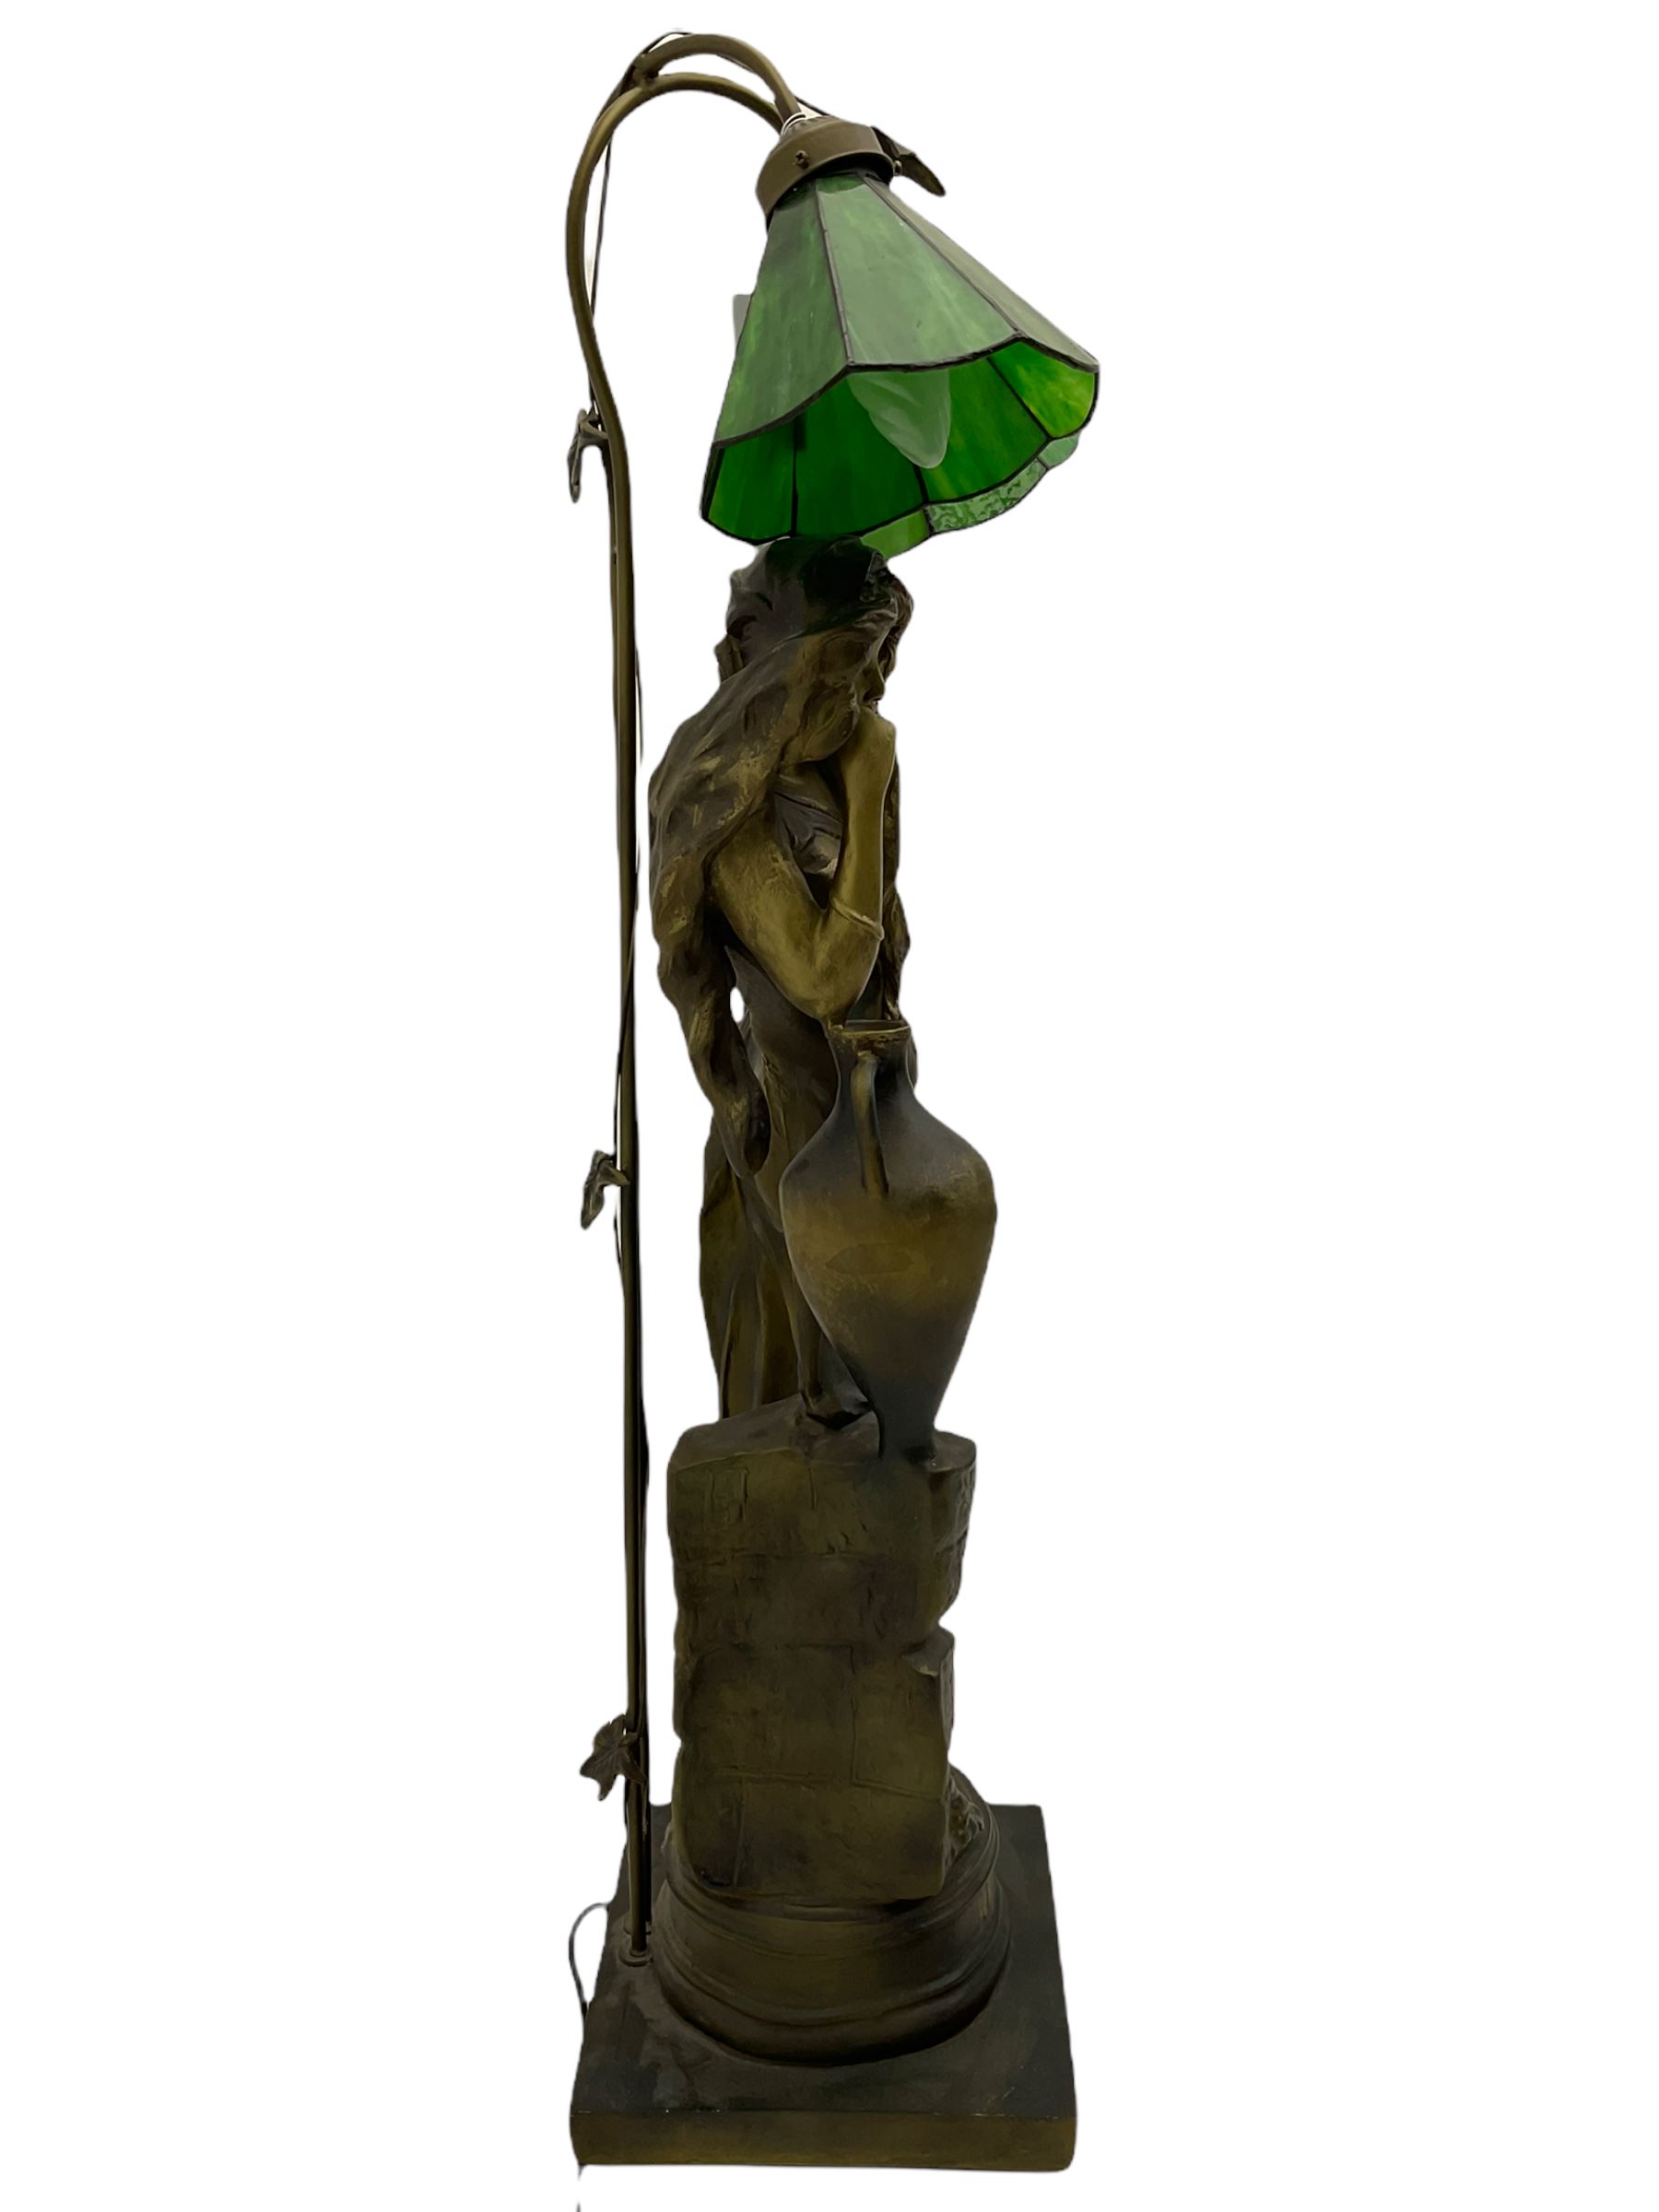 Large Italian style figural lamp depicting Rebecca with urn - Image 3 of 7